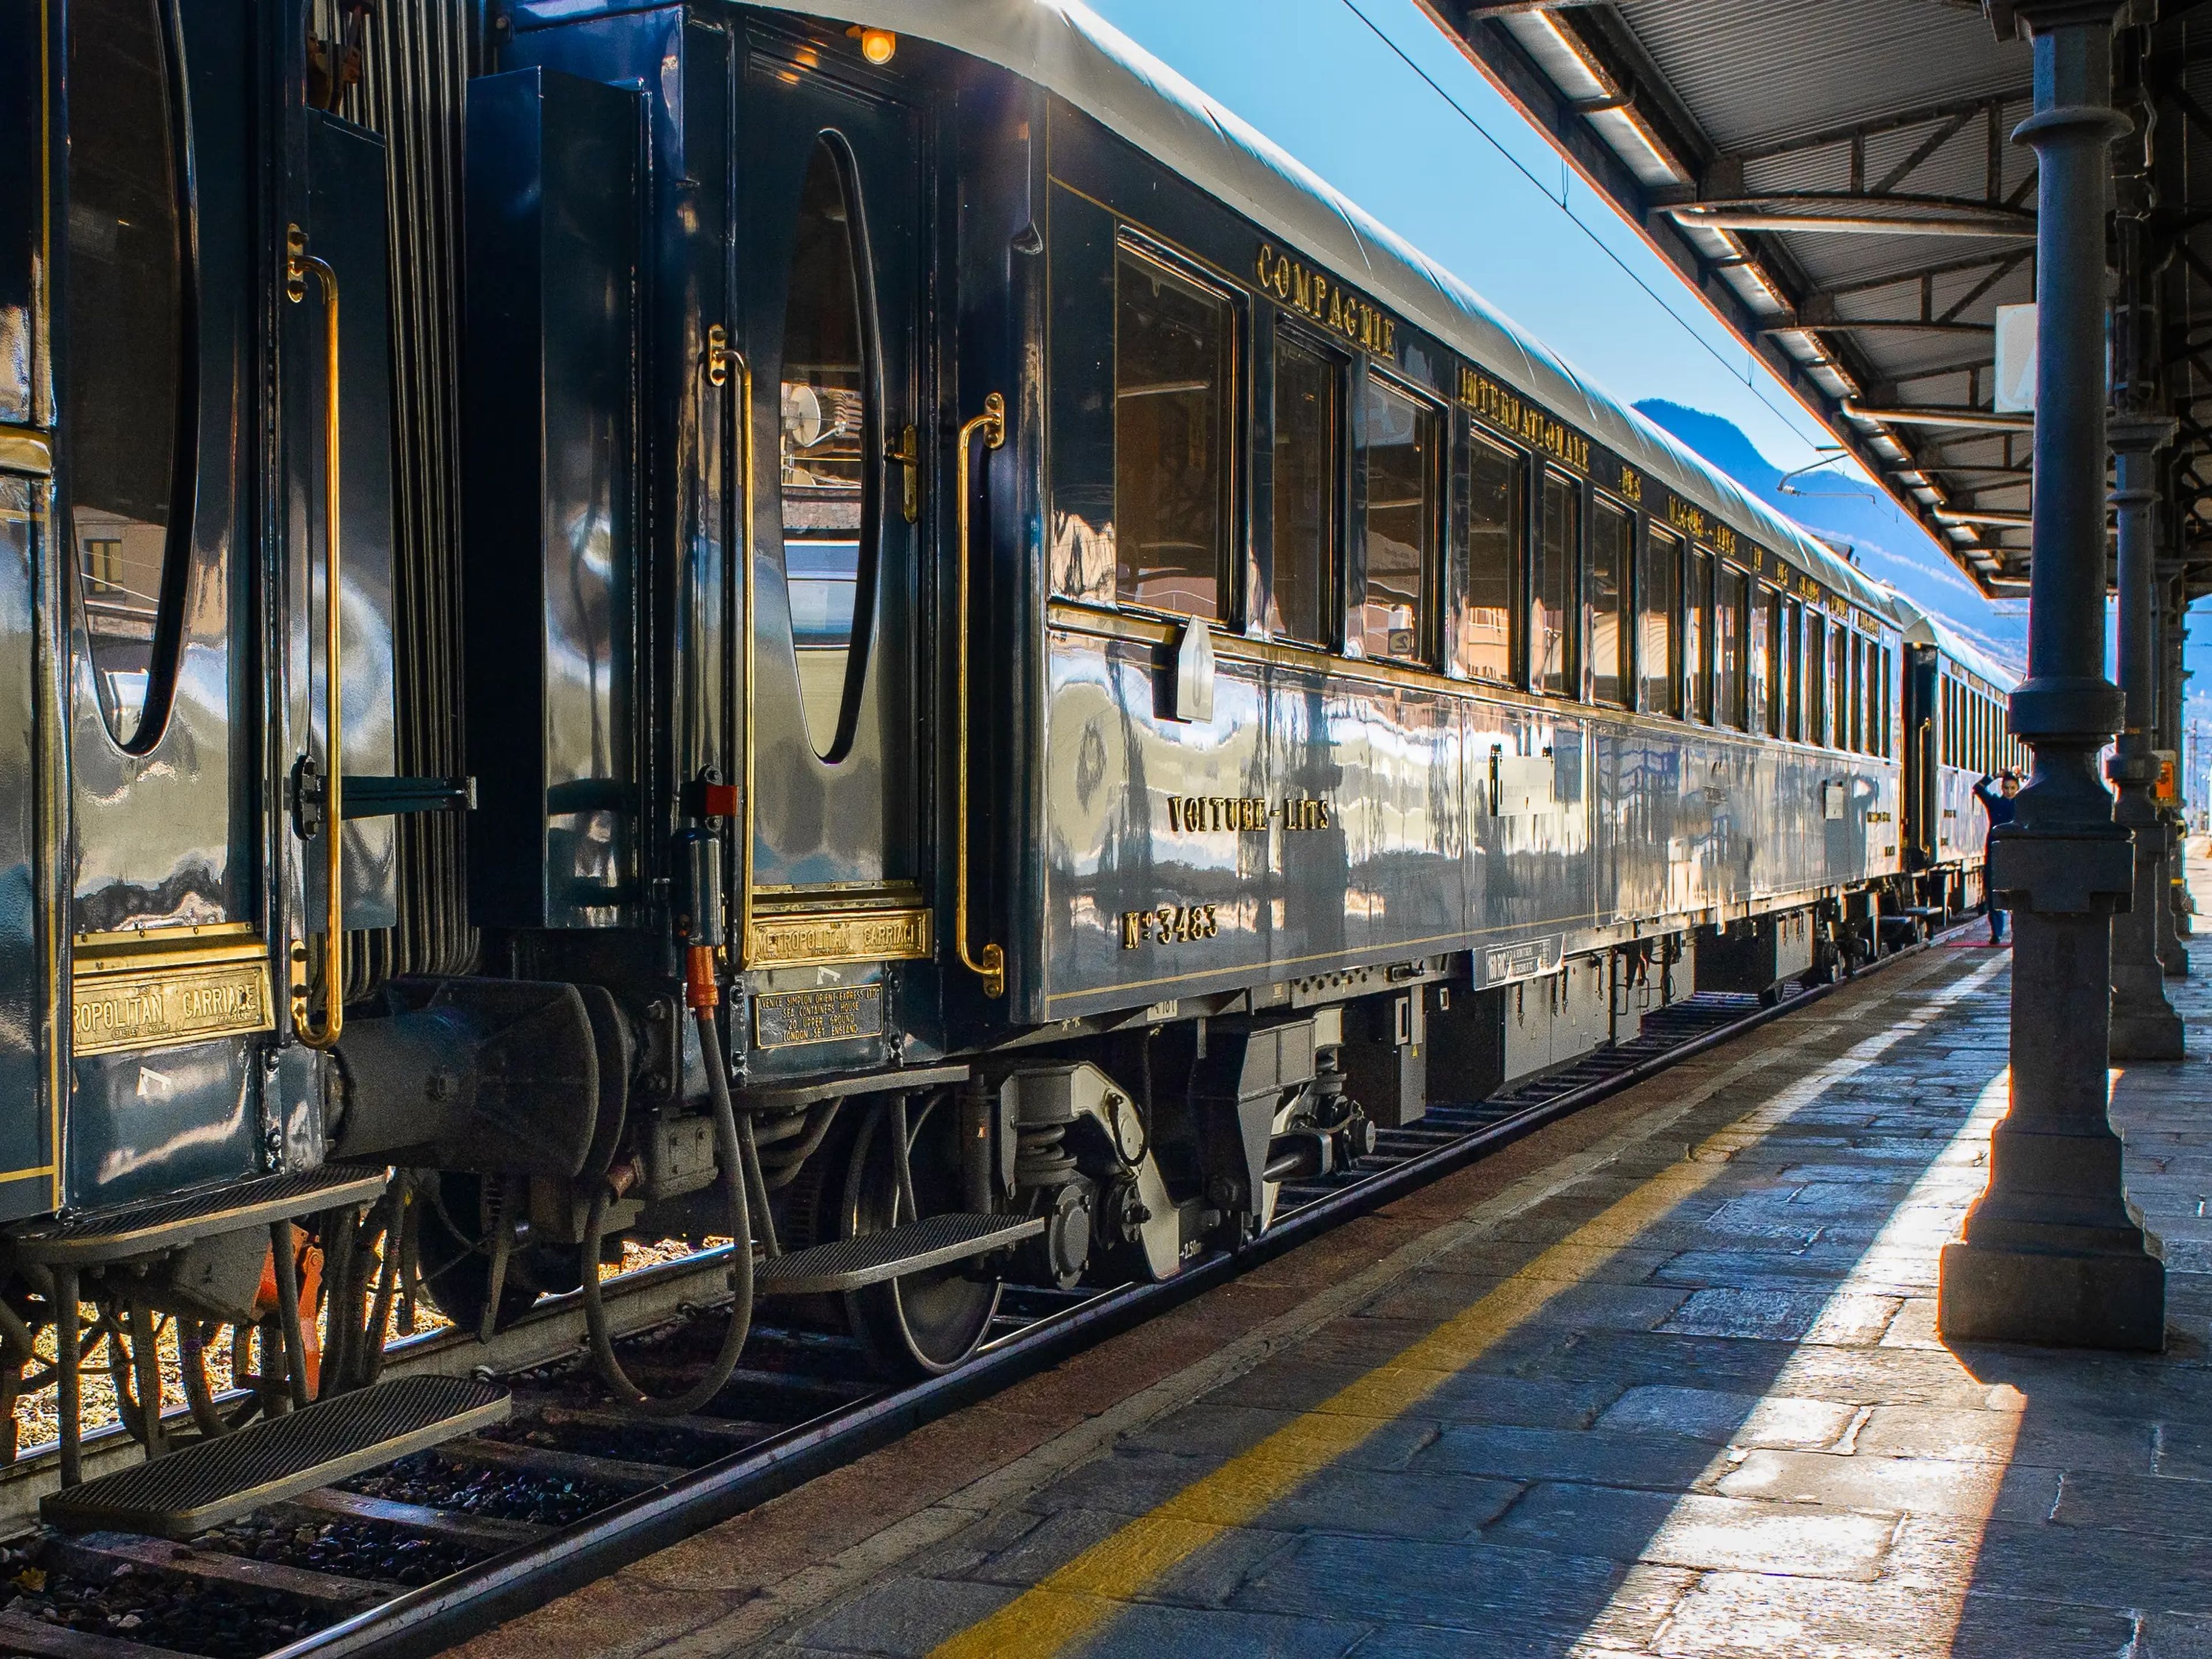 A navy blue train parked at a platform with mountains in the background